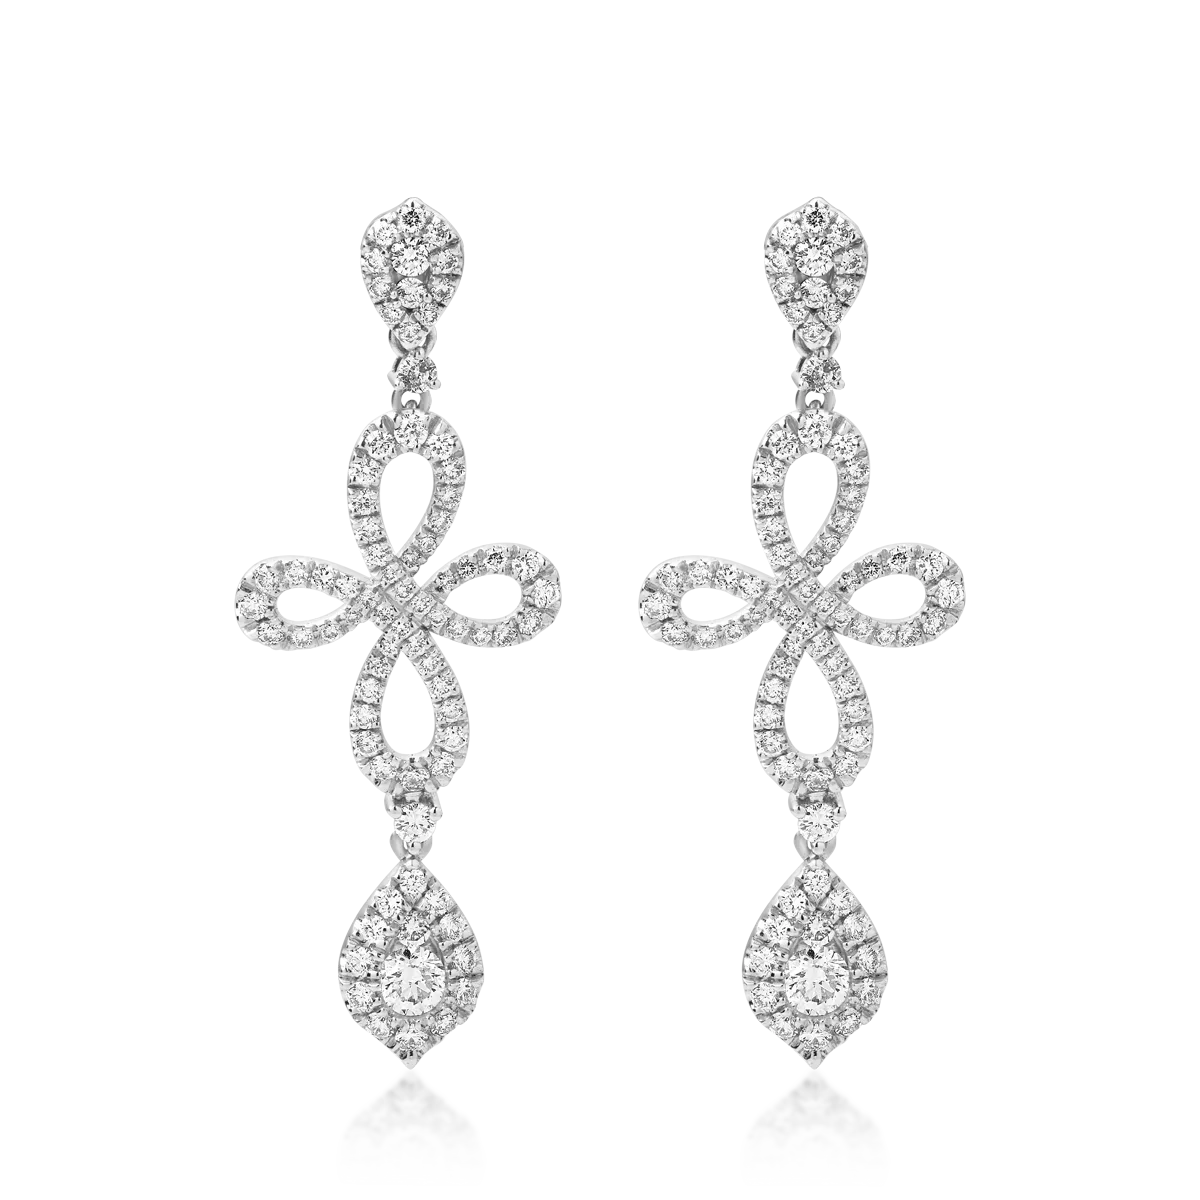 18K white gold earrings with diamonds of 1.88ct